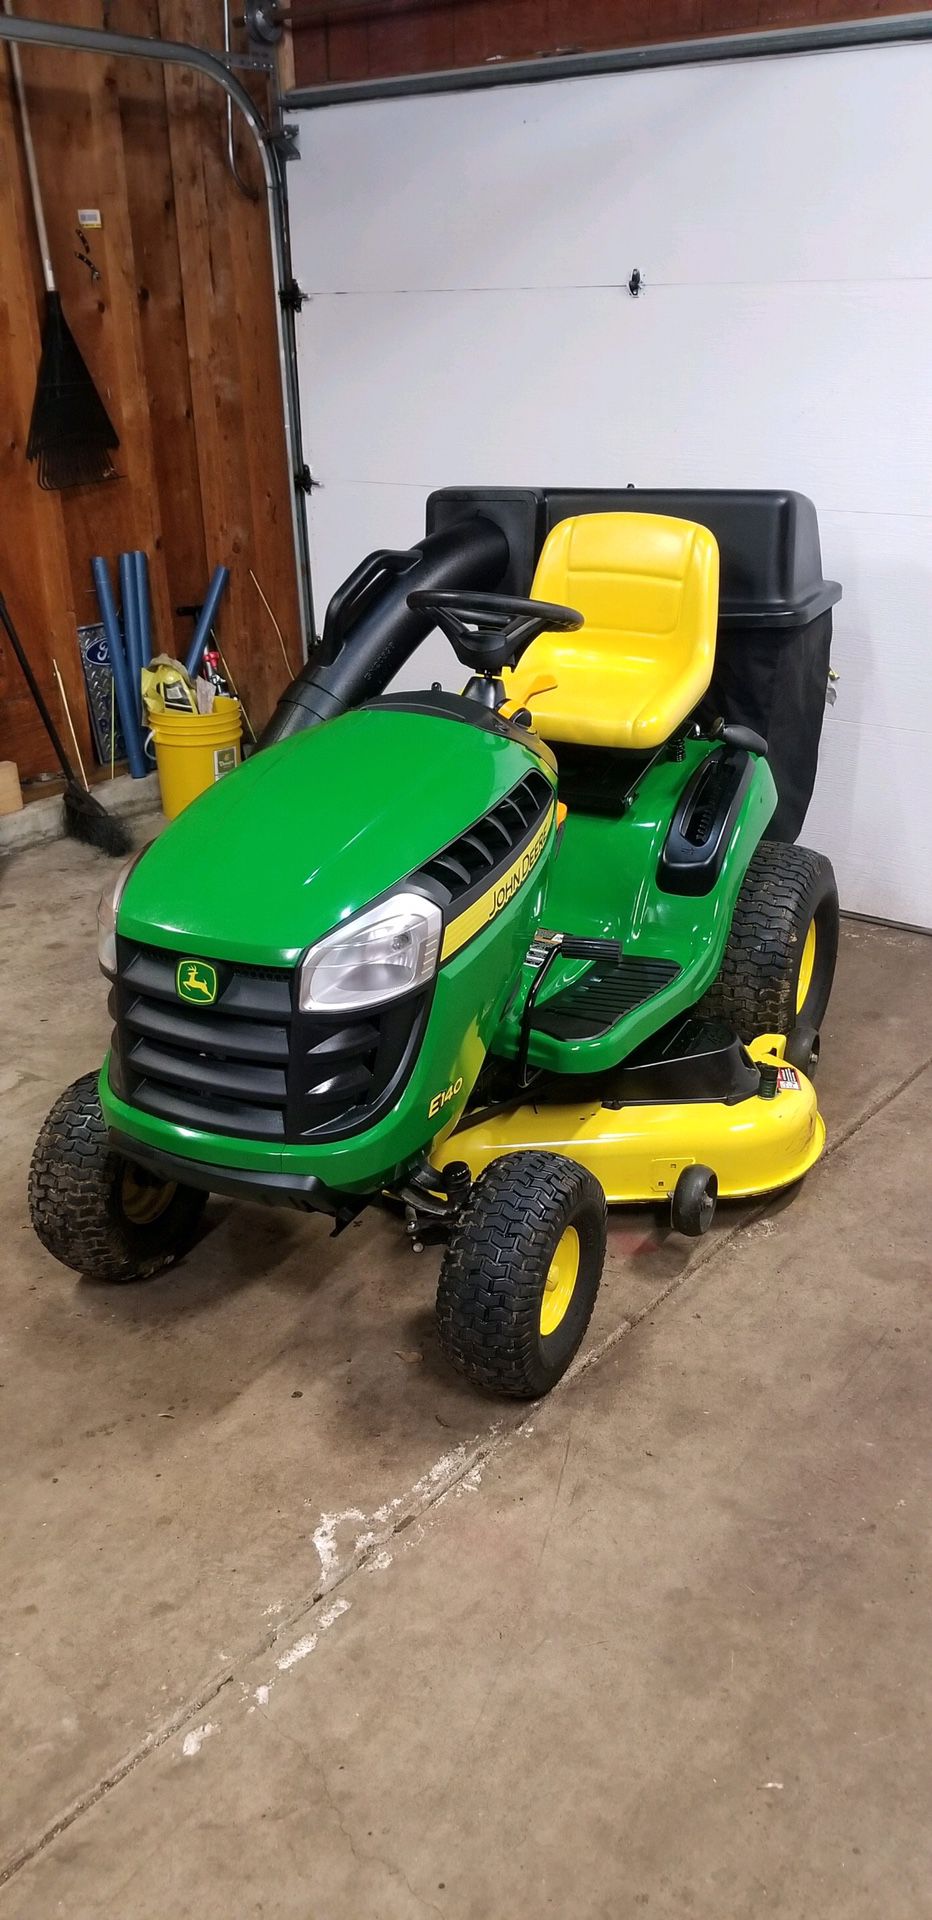 John deer E140 Garden tractor 48” Deck. Purchased in 2019 With Bagger attachment. 22 HP Briggs Engine. 31 HOURS